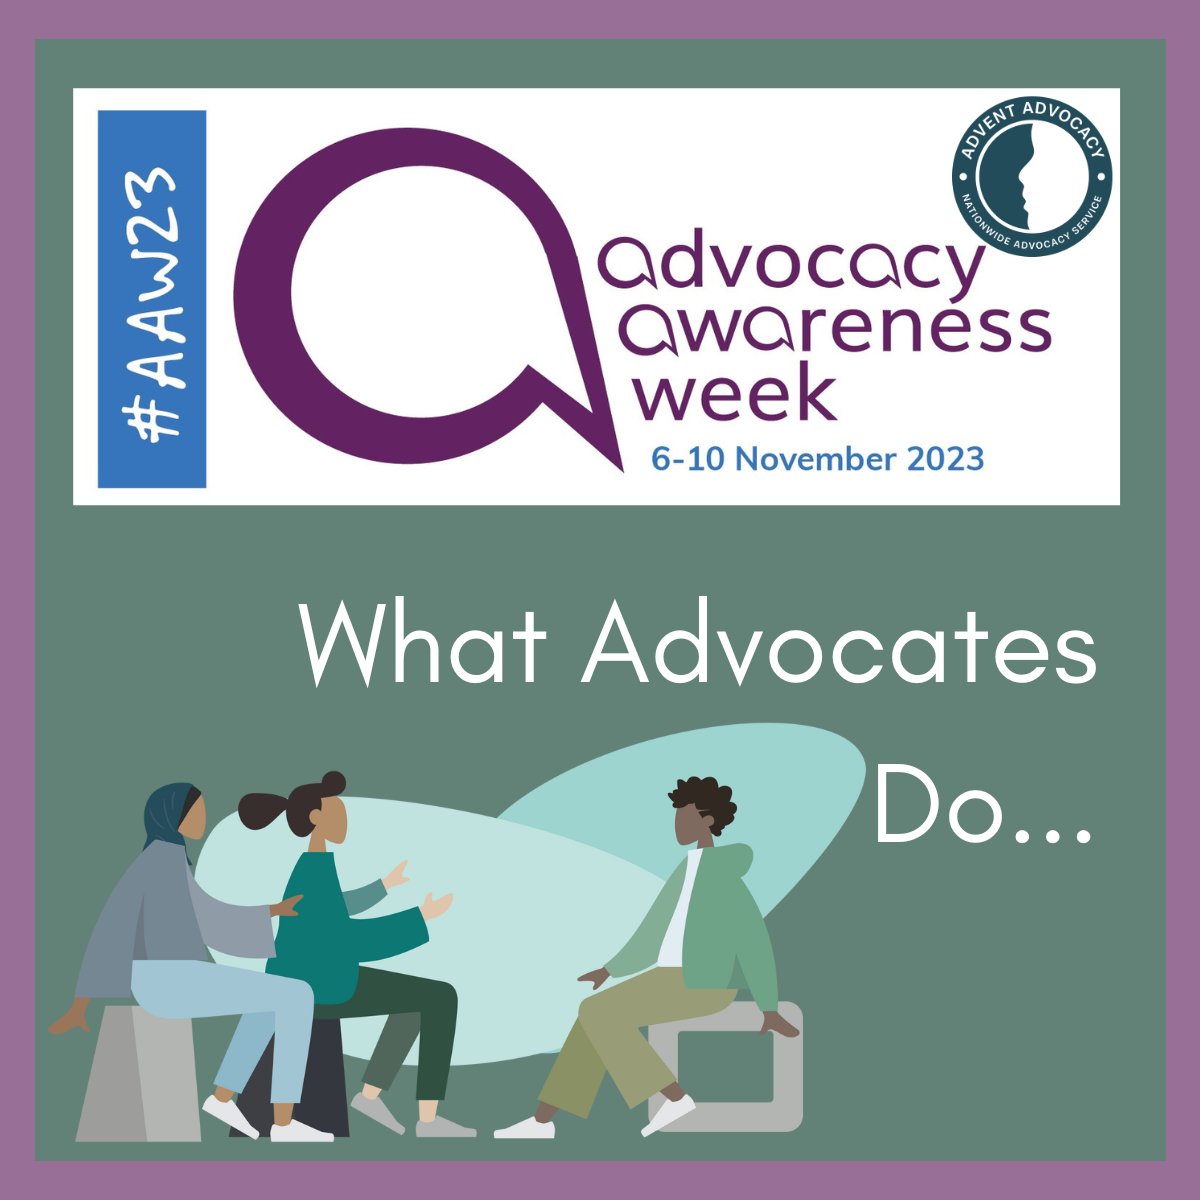 Advocates help people
•speak up for themselves
•understand and navigate health and social care systems
•explore their options and make their own decisions
Advocates help to keep people safe.
#AAW23 #HearMyVoice #MentalHealthMatters